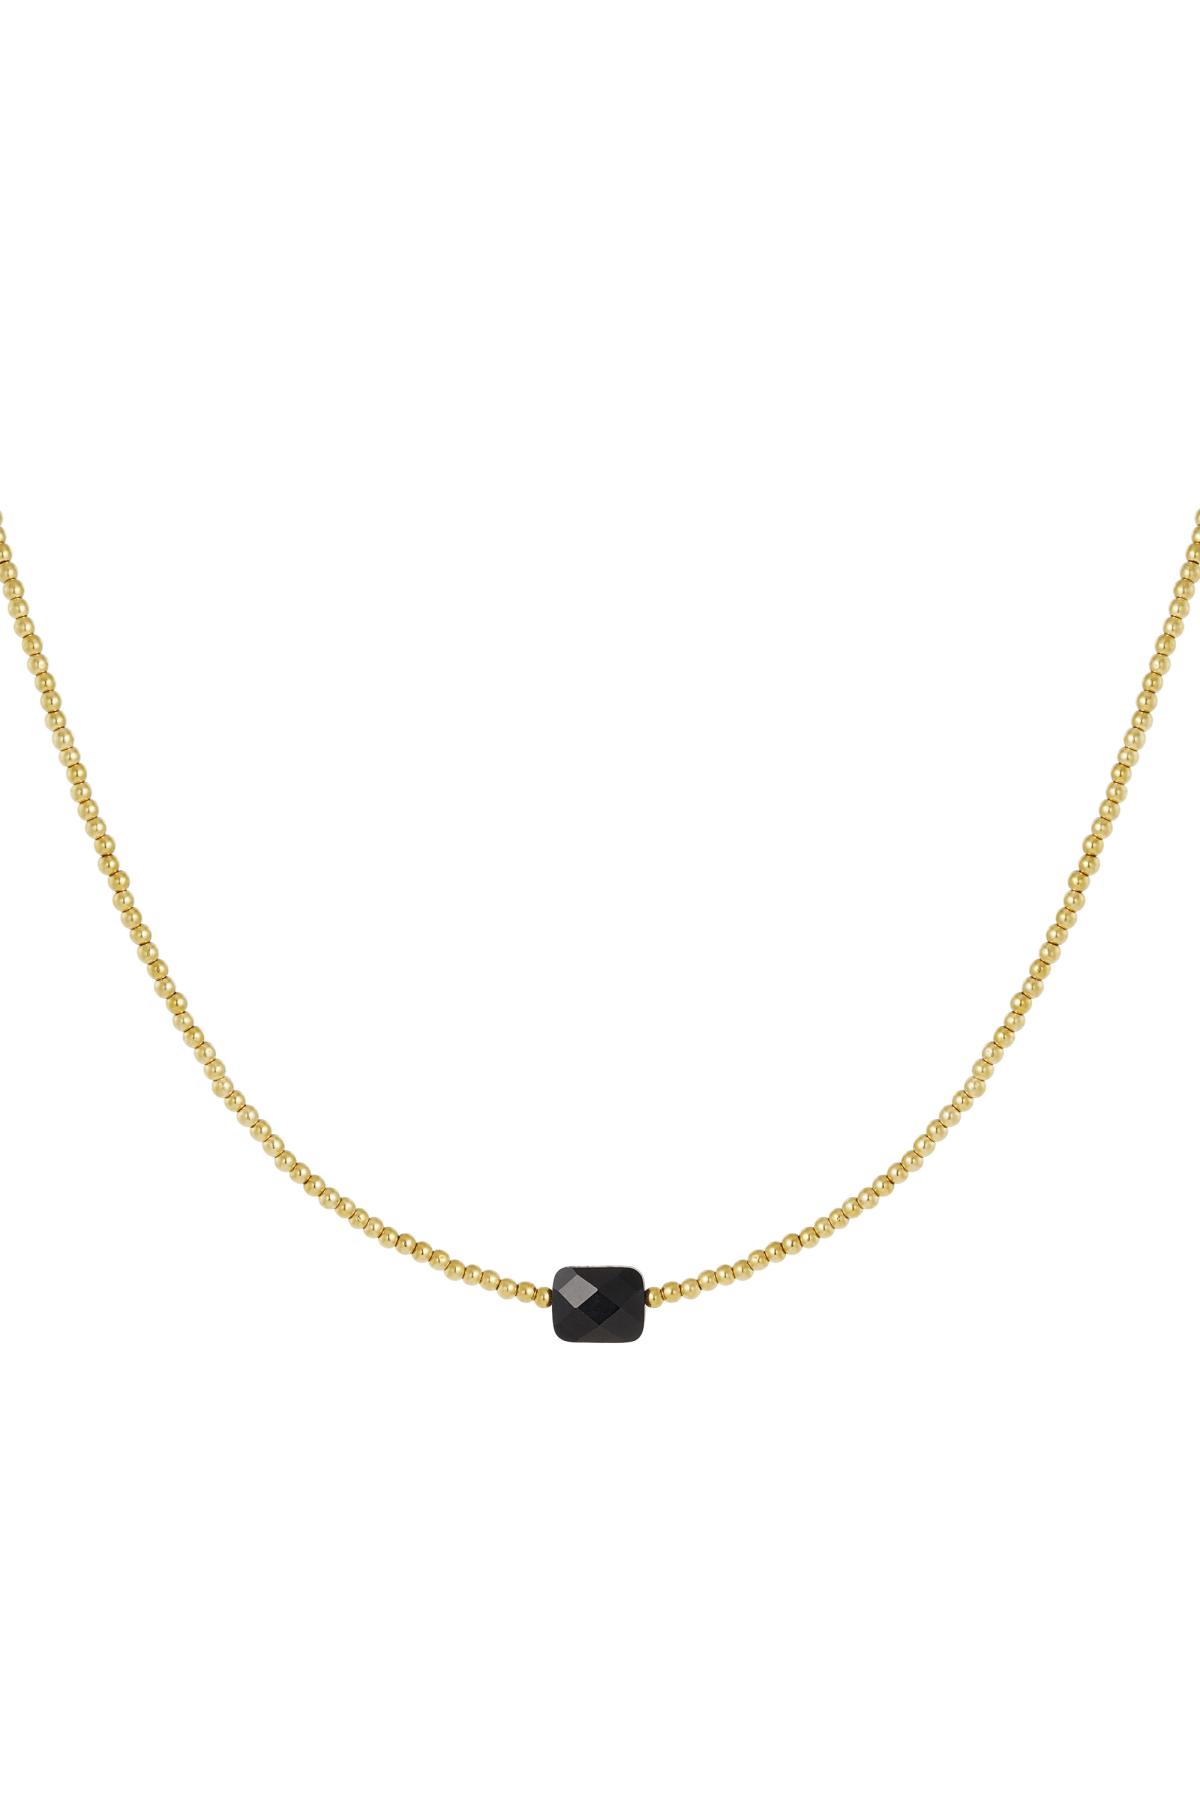 Necklace beads with large stone - Natural stone collection Black & Gold Stainless Steel h5 